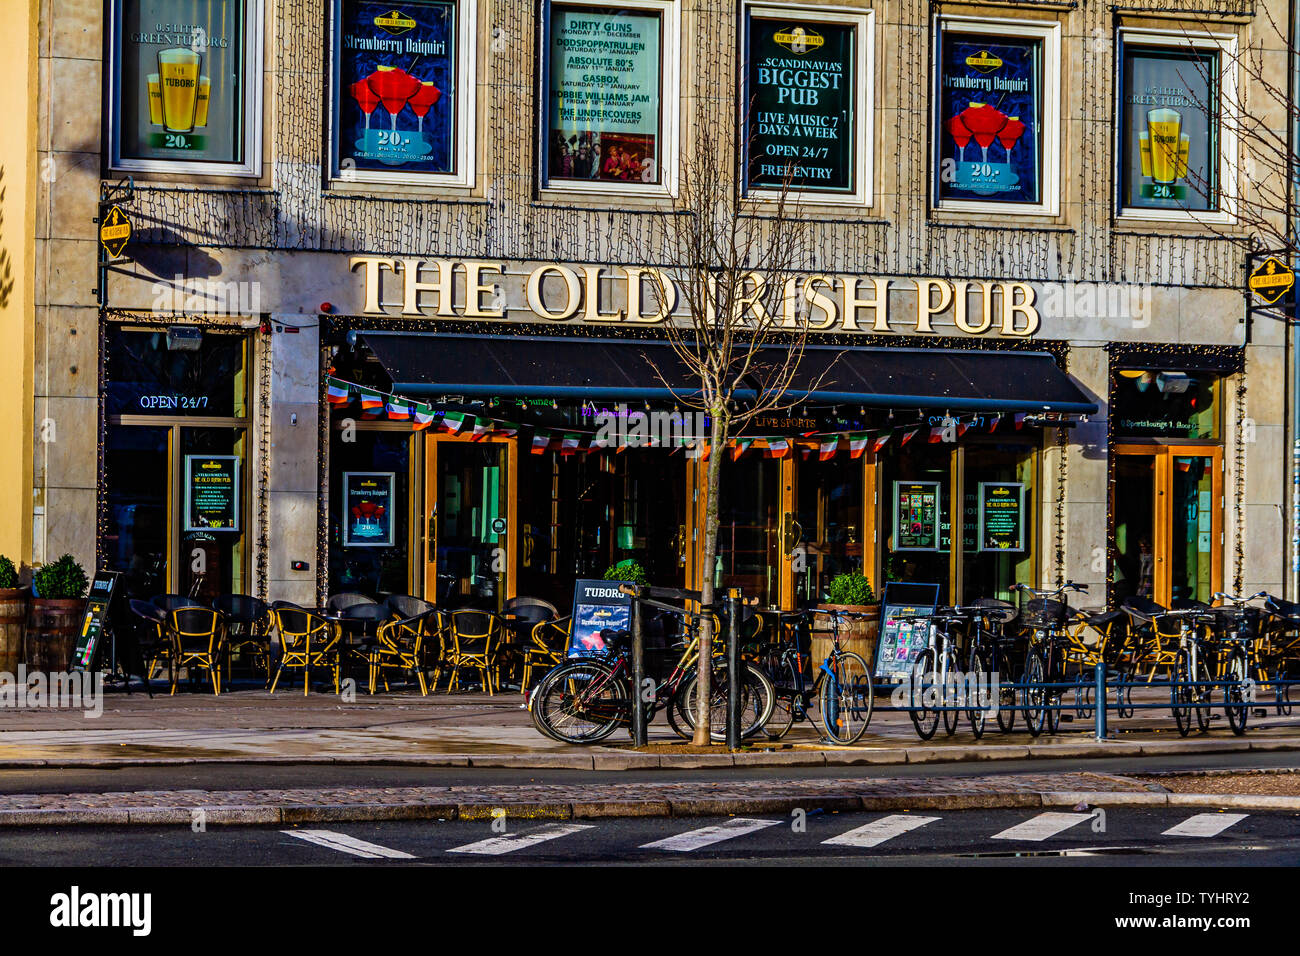 Vesterbrogade High Resolution Stock Photography and Images - Alamy